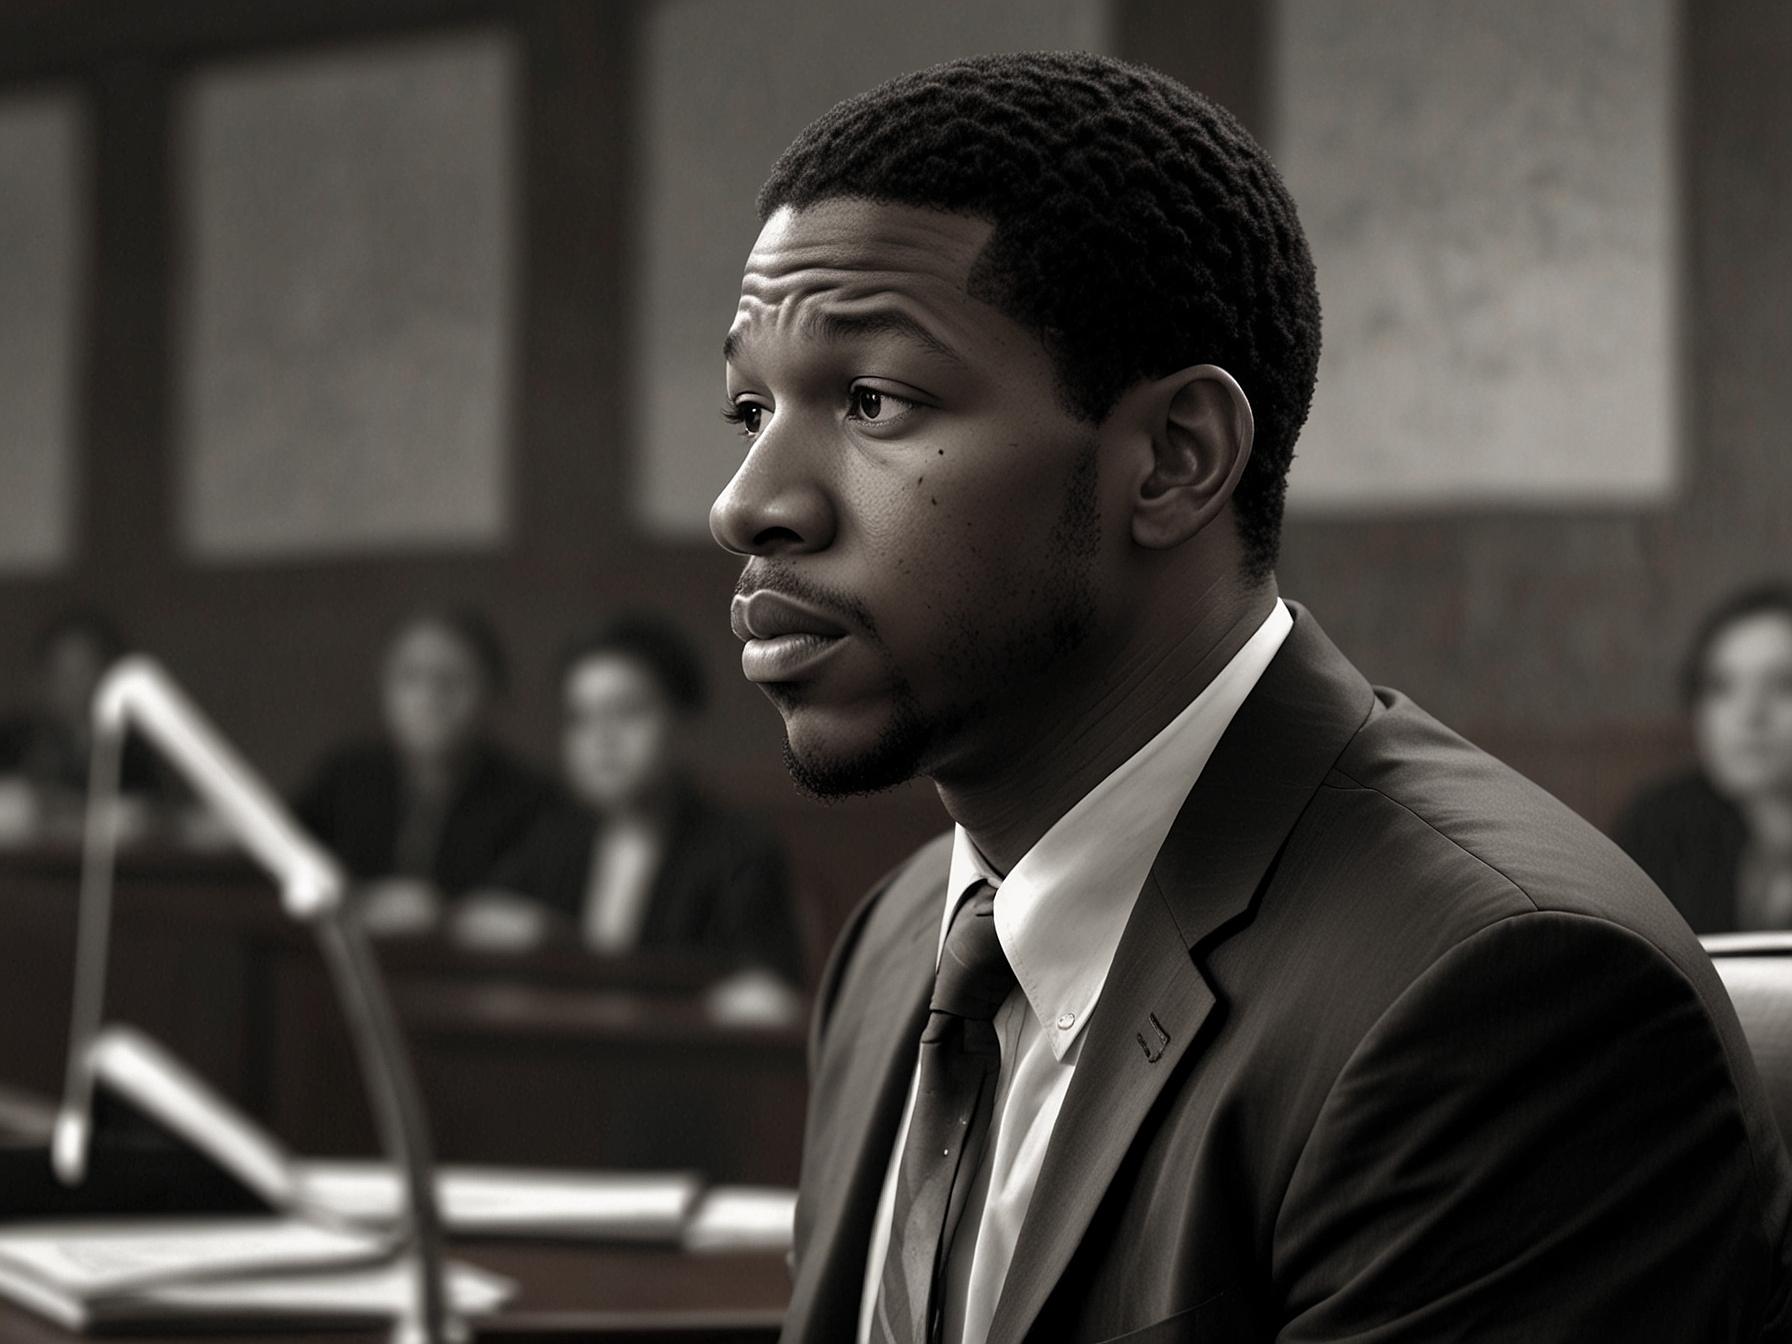 Jonathan Majors attending a court hearing, dressed formally, looking pensive as he navigates the complexities of his legal and professional responsibilities.